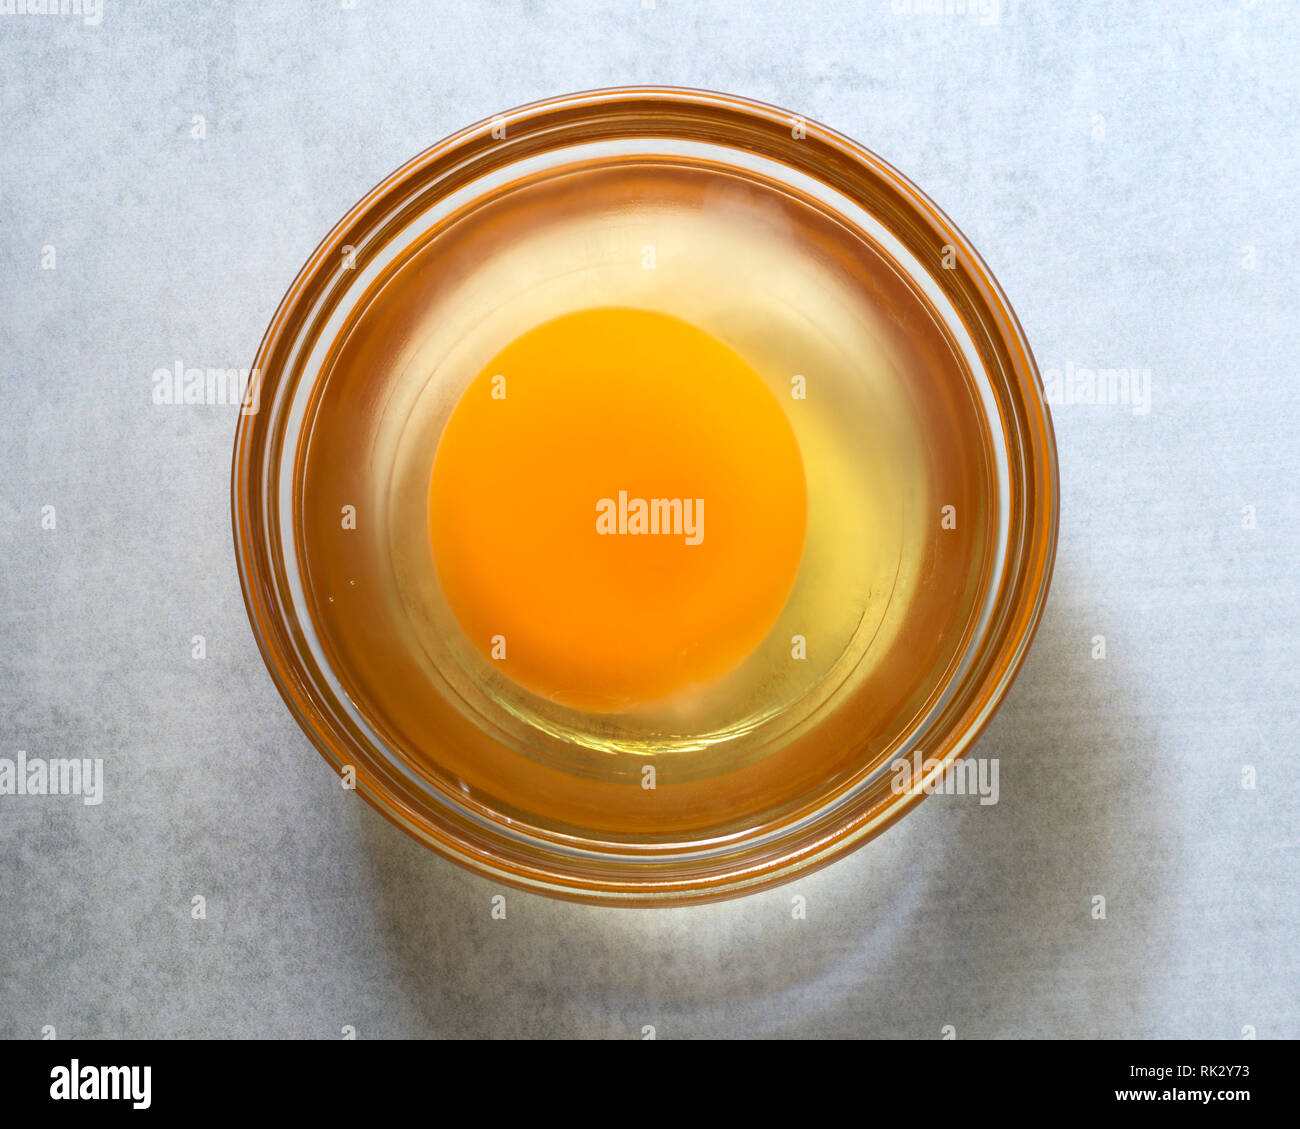 A cracked raw egg close-up. Stock Photo